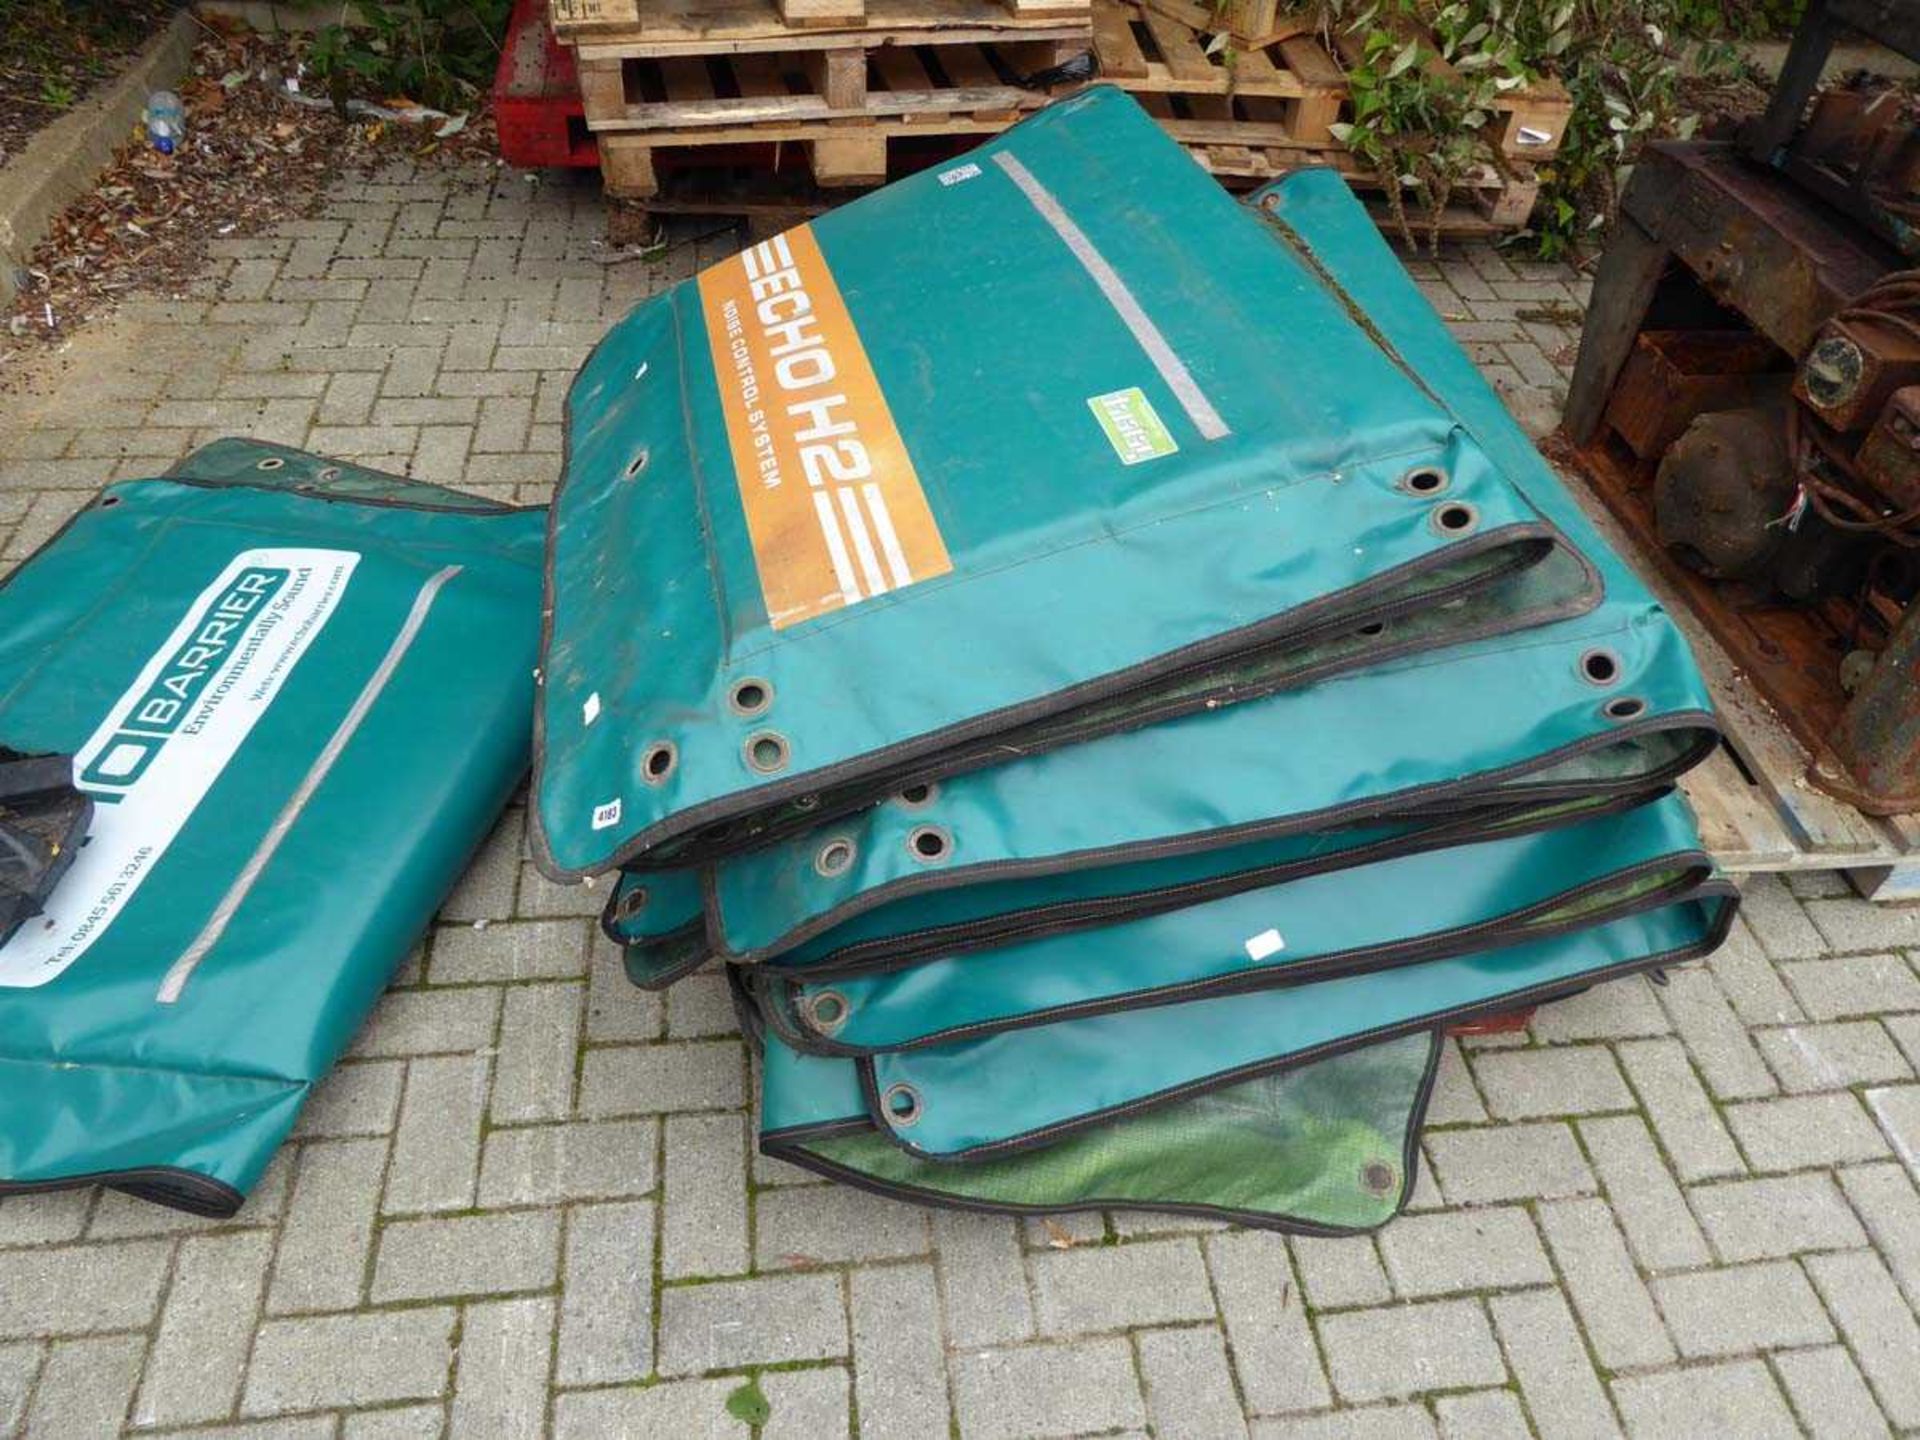 Pallet containing wind/security shields